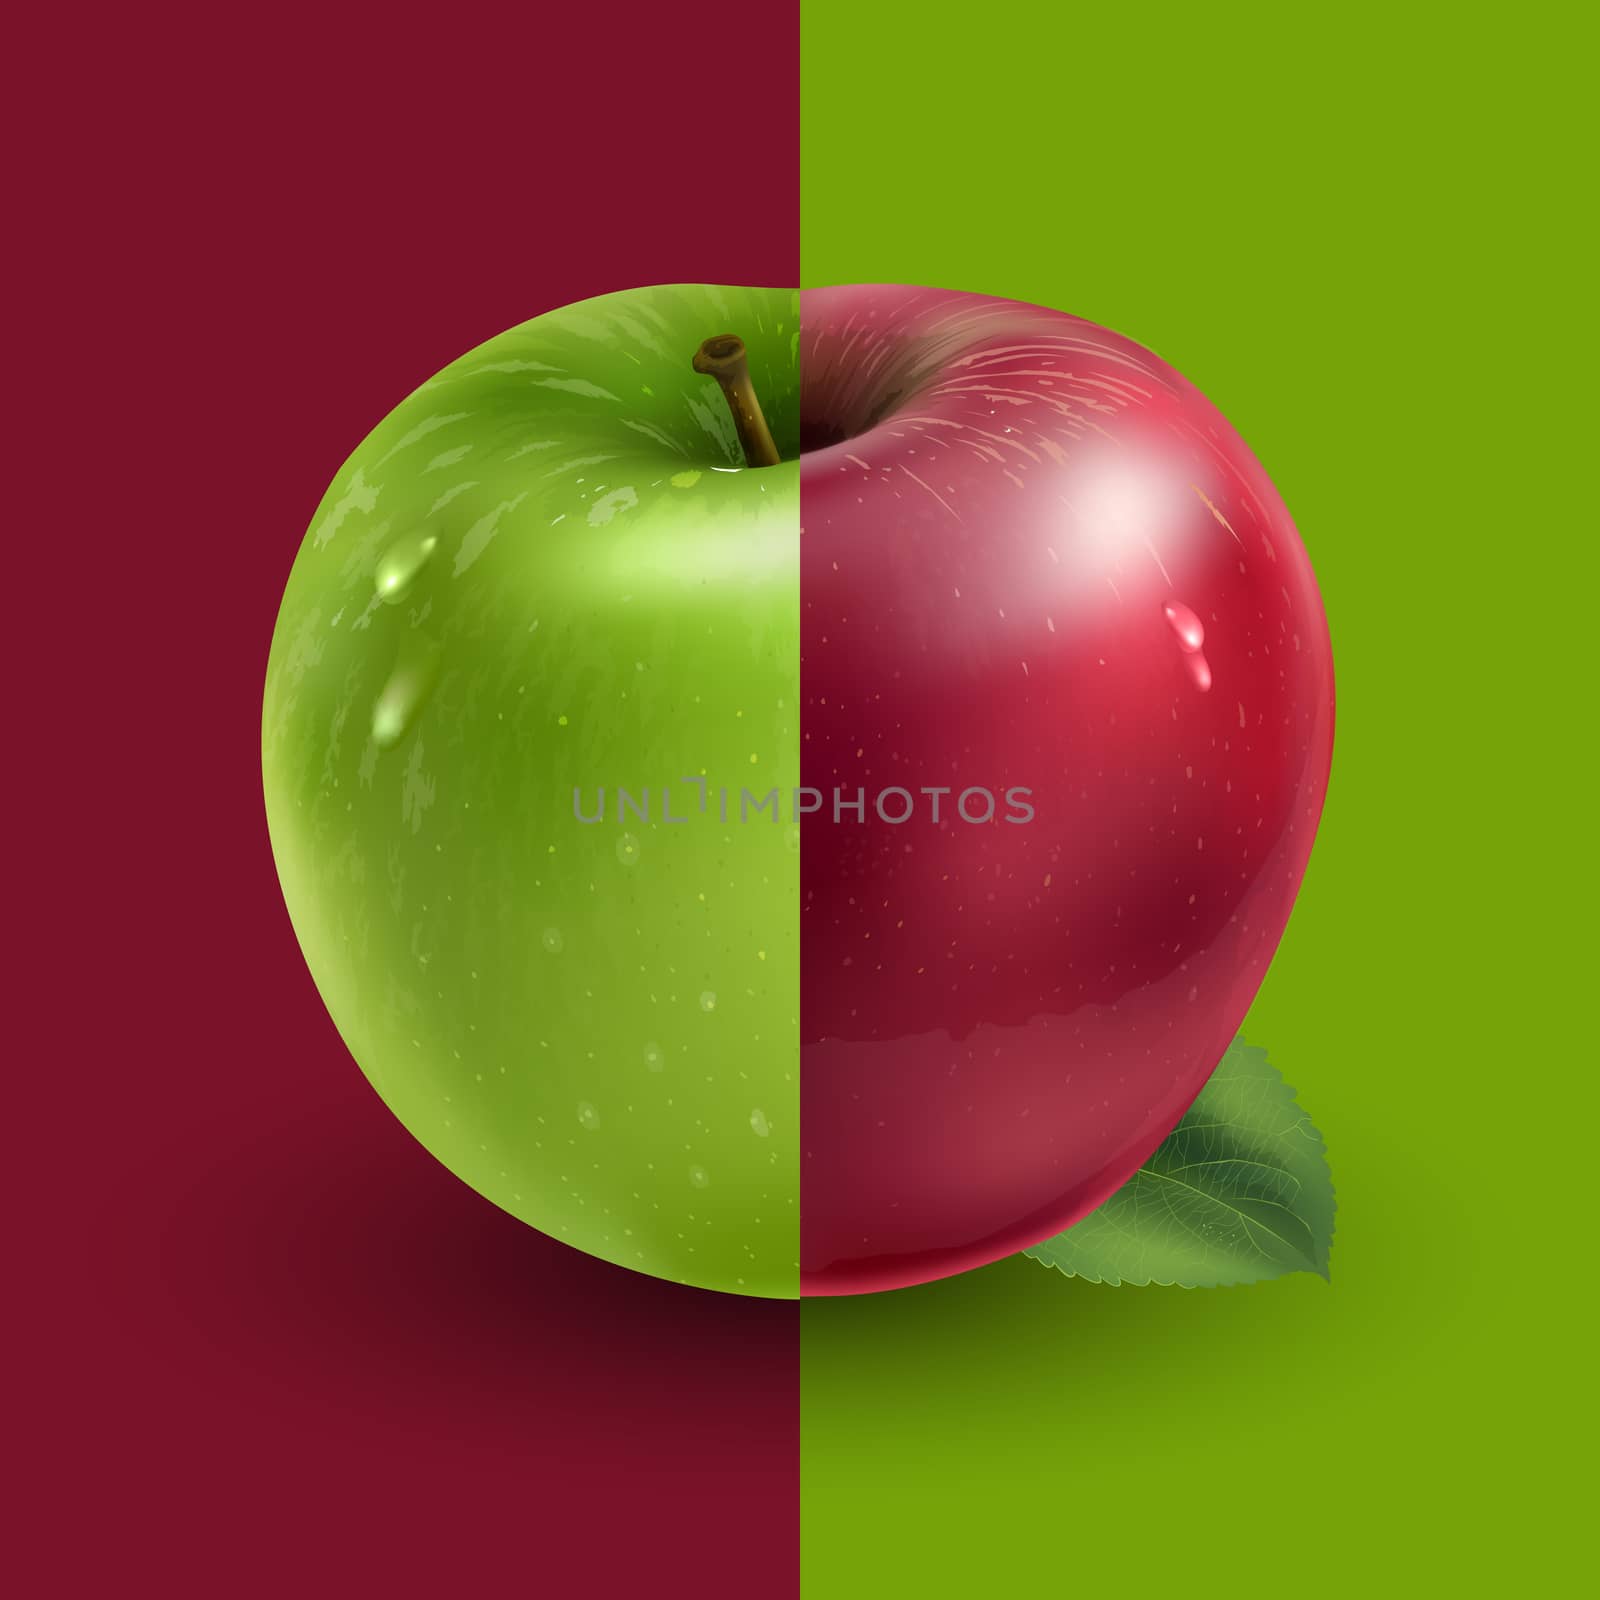 Green and red apples on a background.